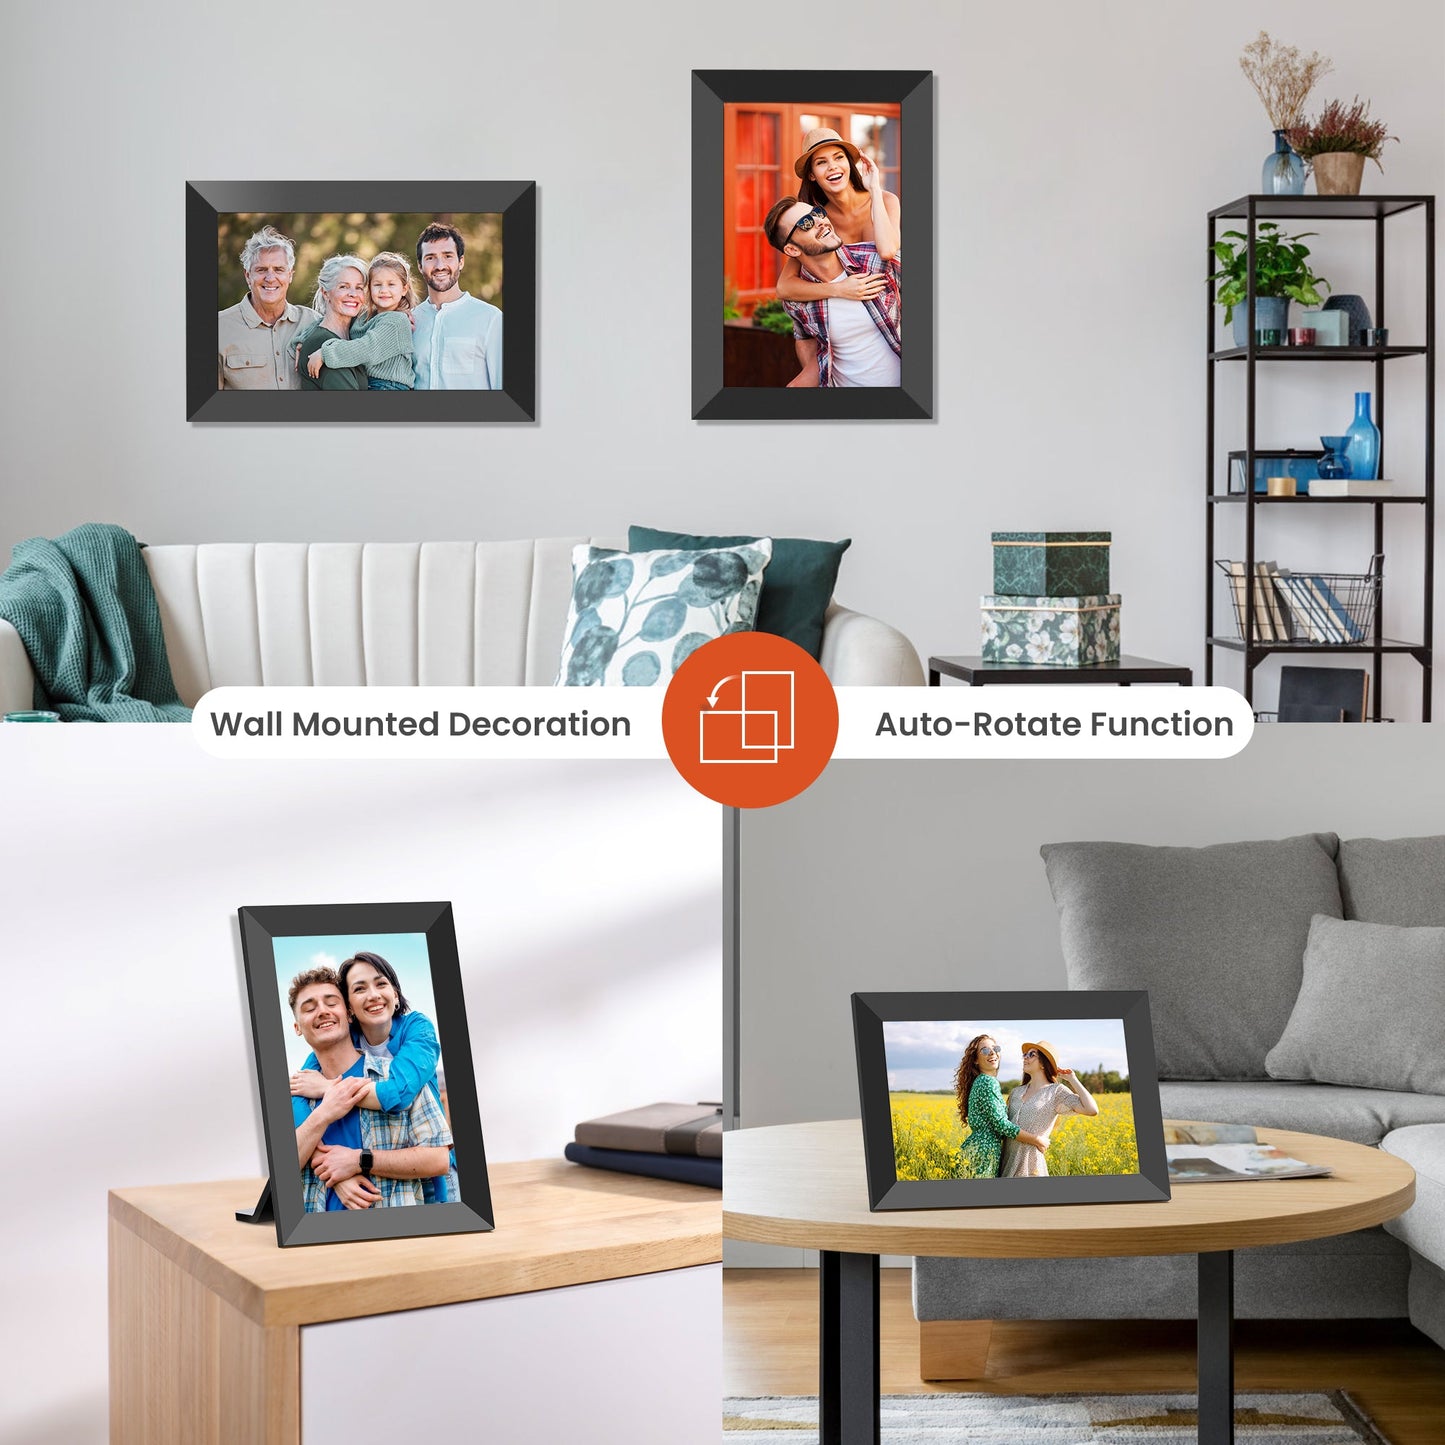 X-901 WiFi Digital Photo Frame, 10.1 Inch IPS Touch Screen Electric Smart Picture Frame